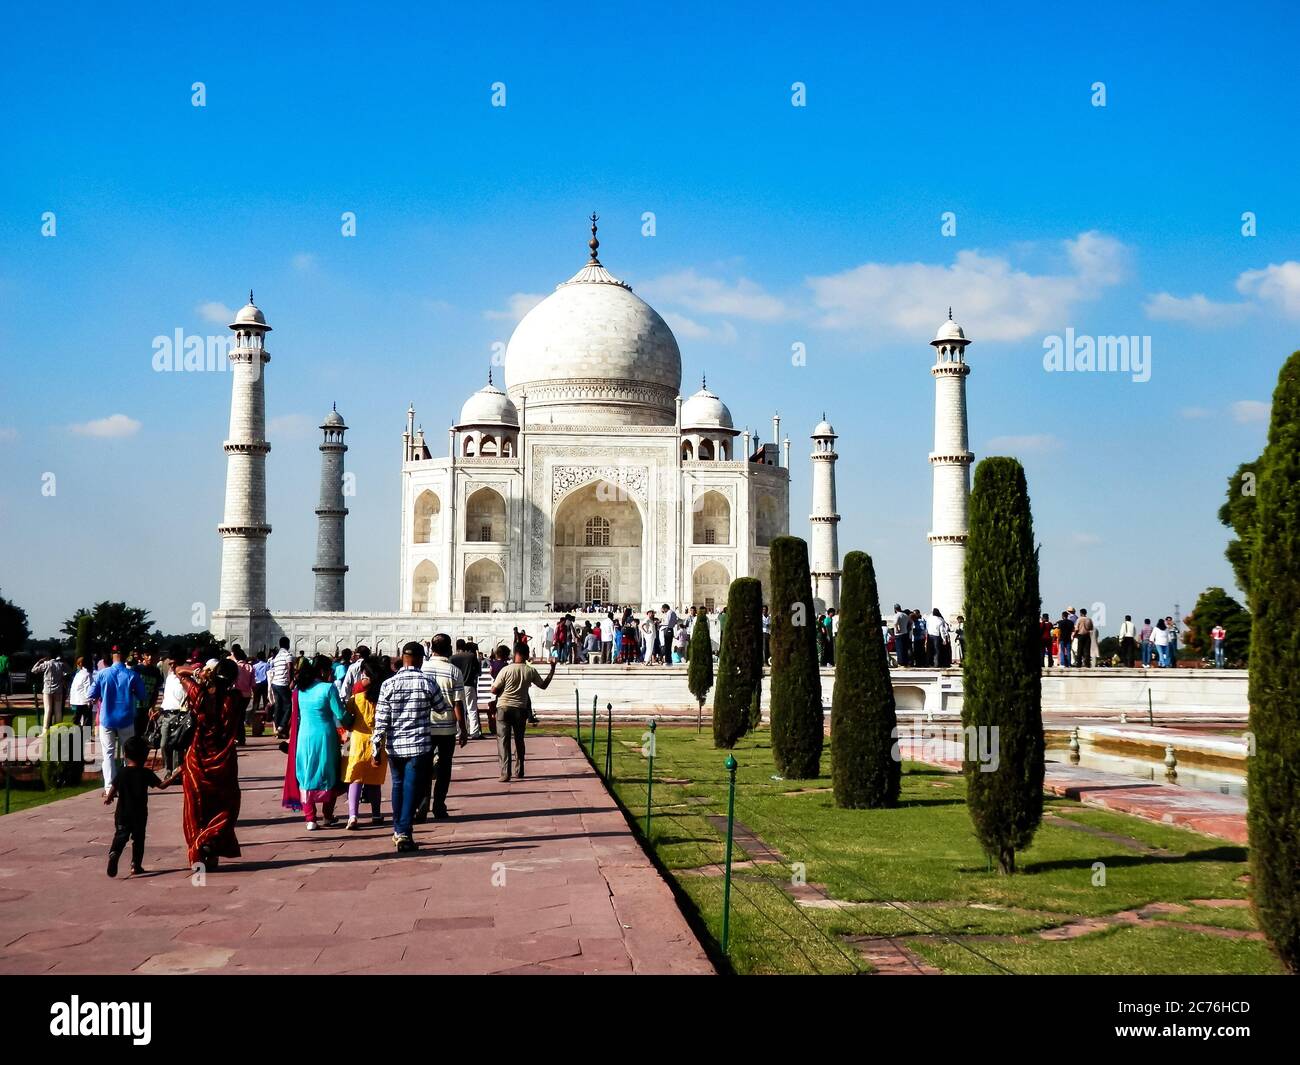 Indian tourists at the Taj Mahal in Agra, Uttar Pradesh, India. One of the New Seven Wonders of the World and UNESCO world heritage site. Stock Photo